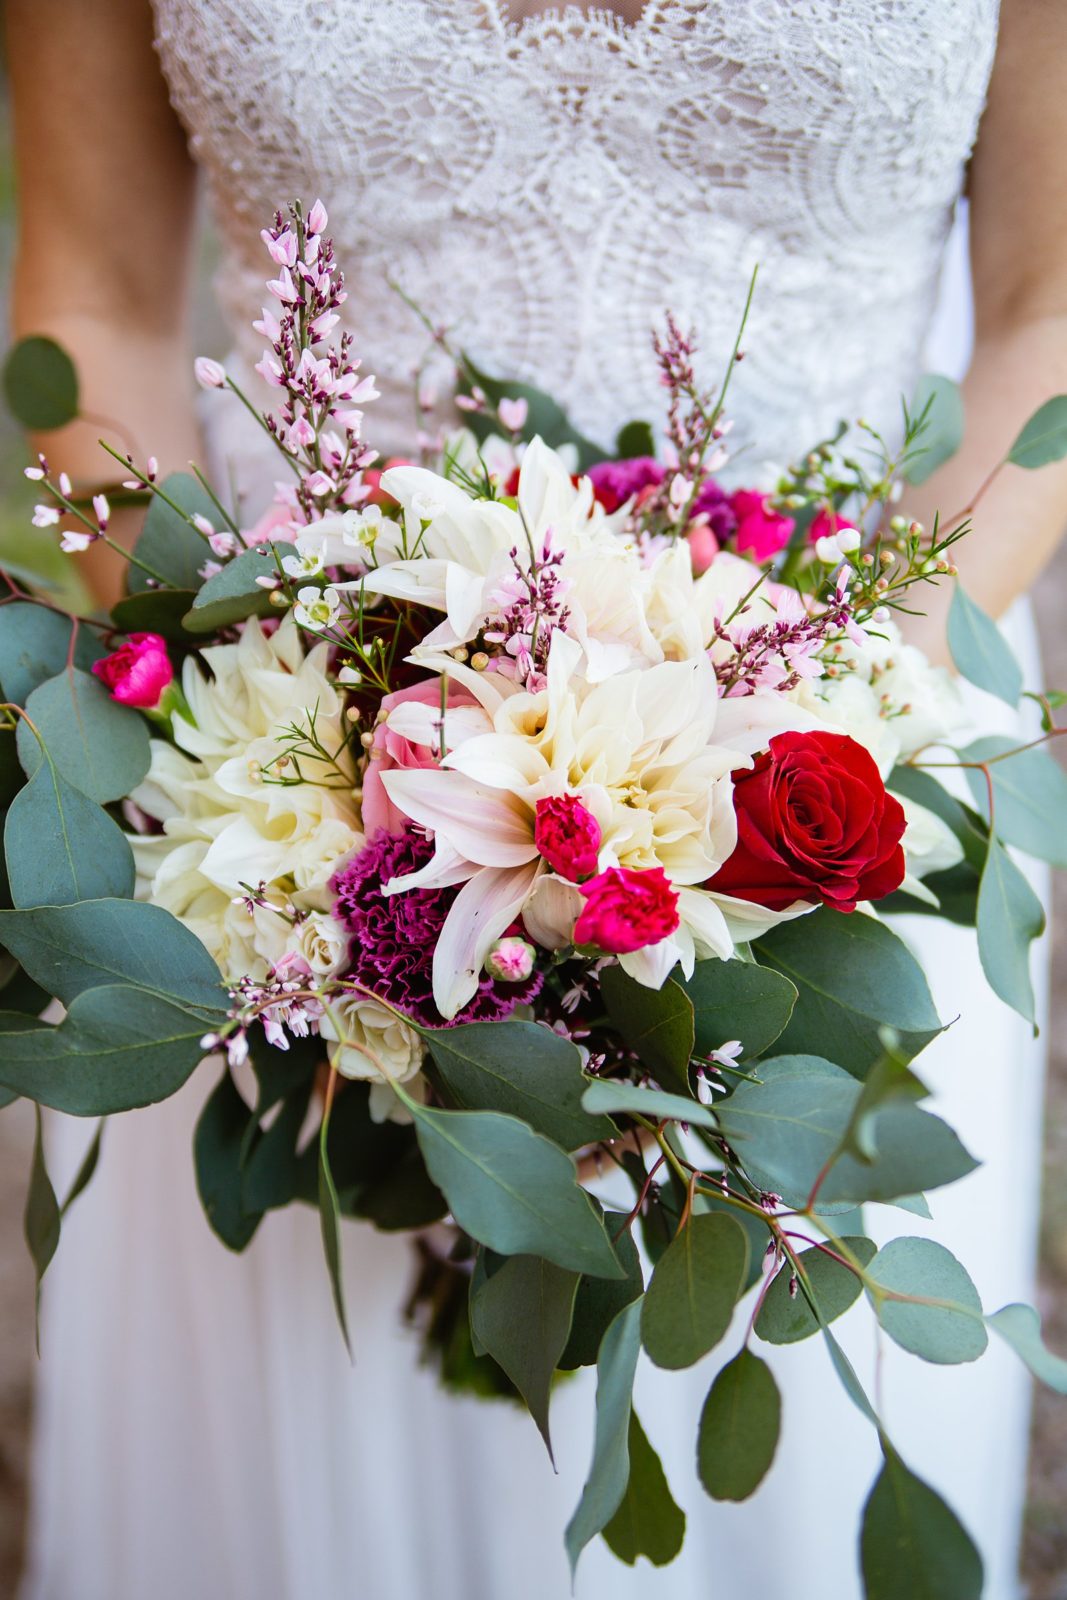 Bride's romantic white and pink bouquet by PMA Photography.